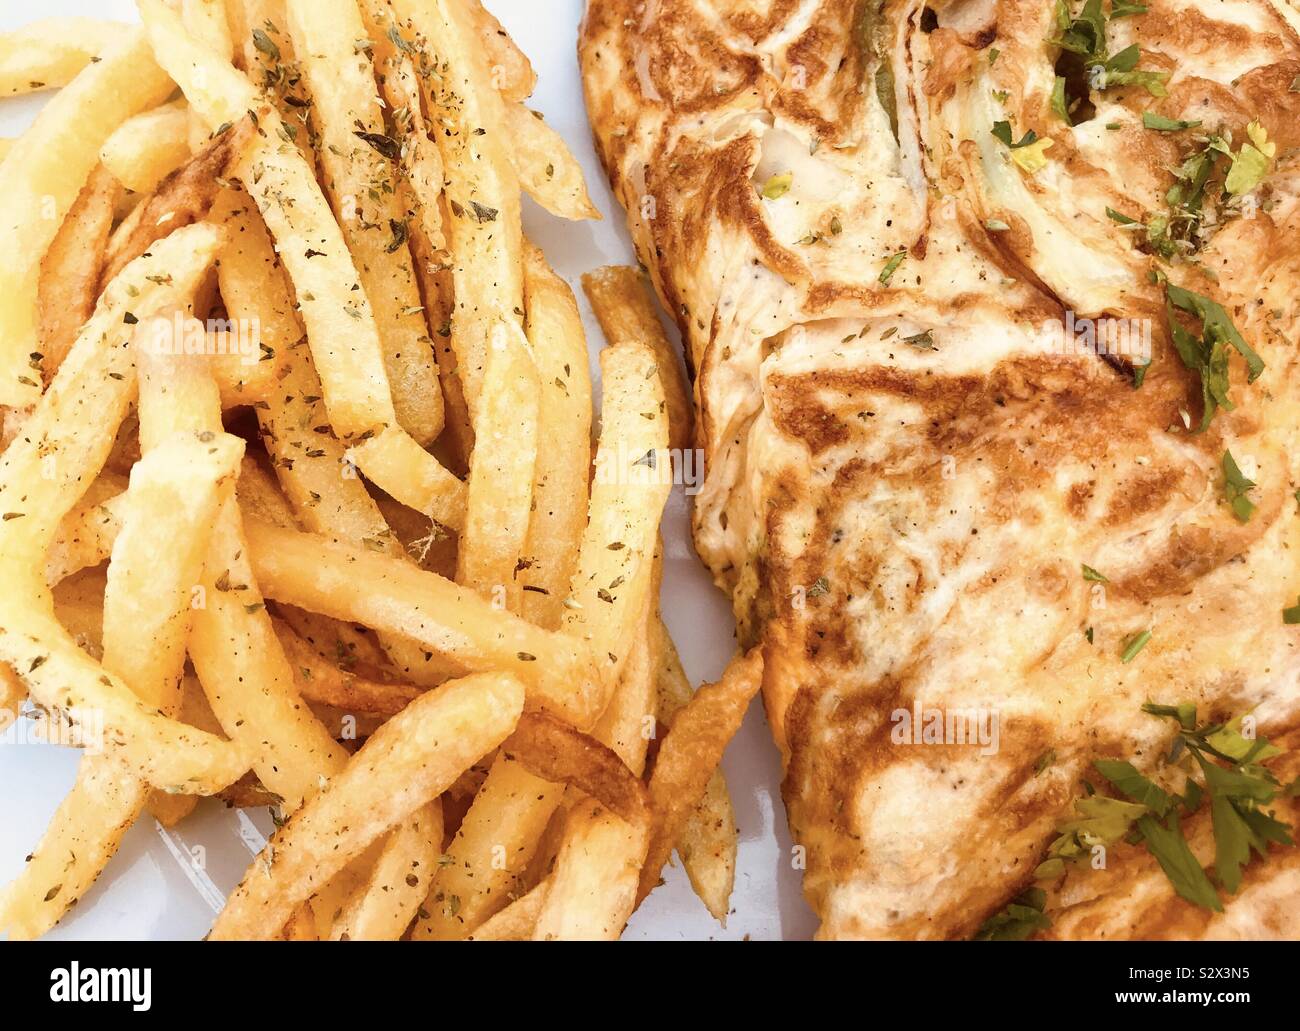 Cheese omelette with chips Stock Photo